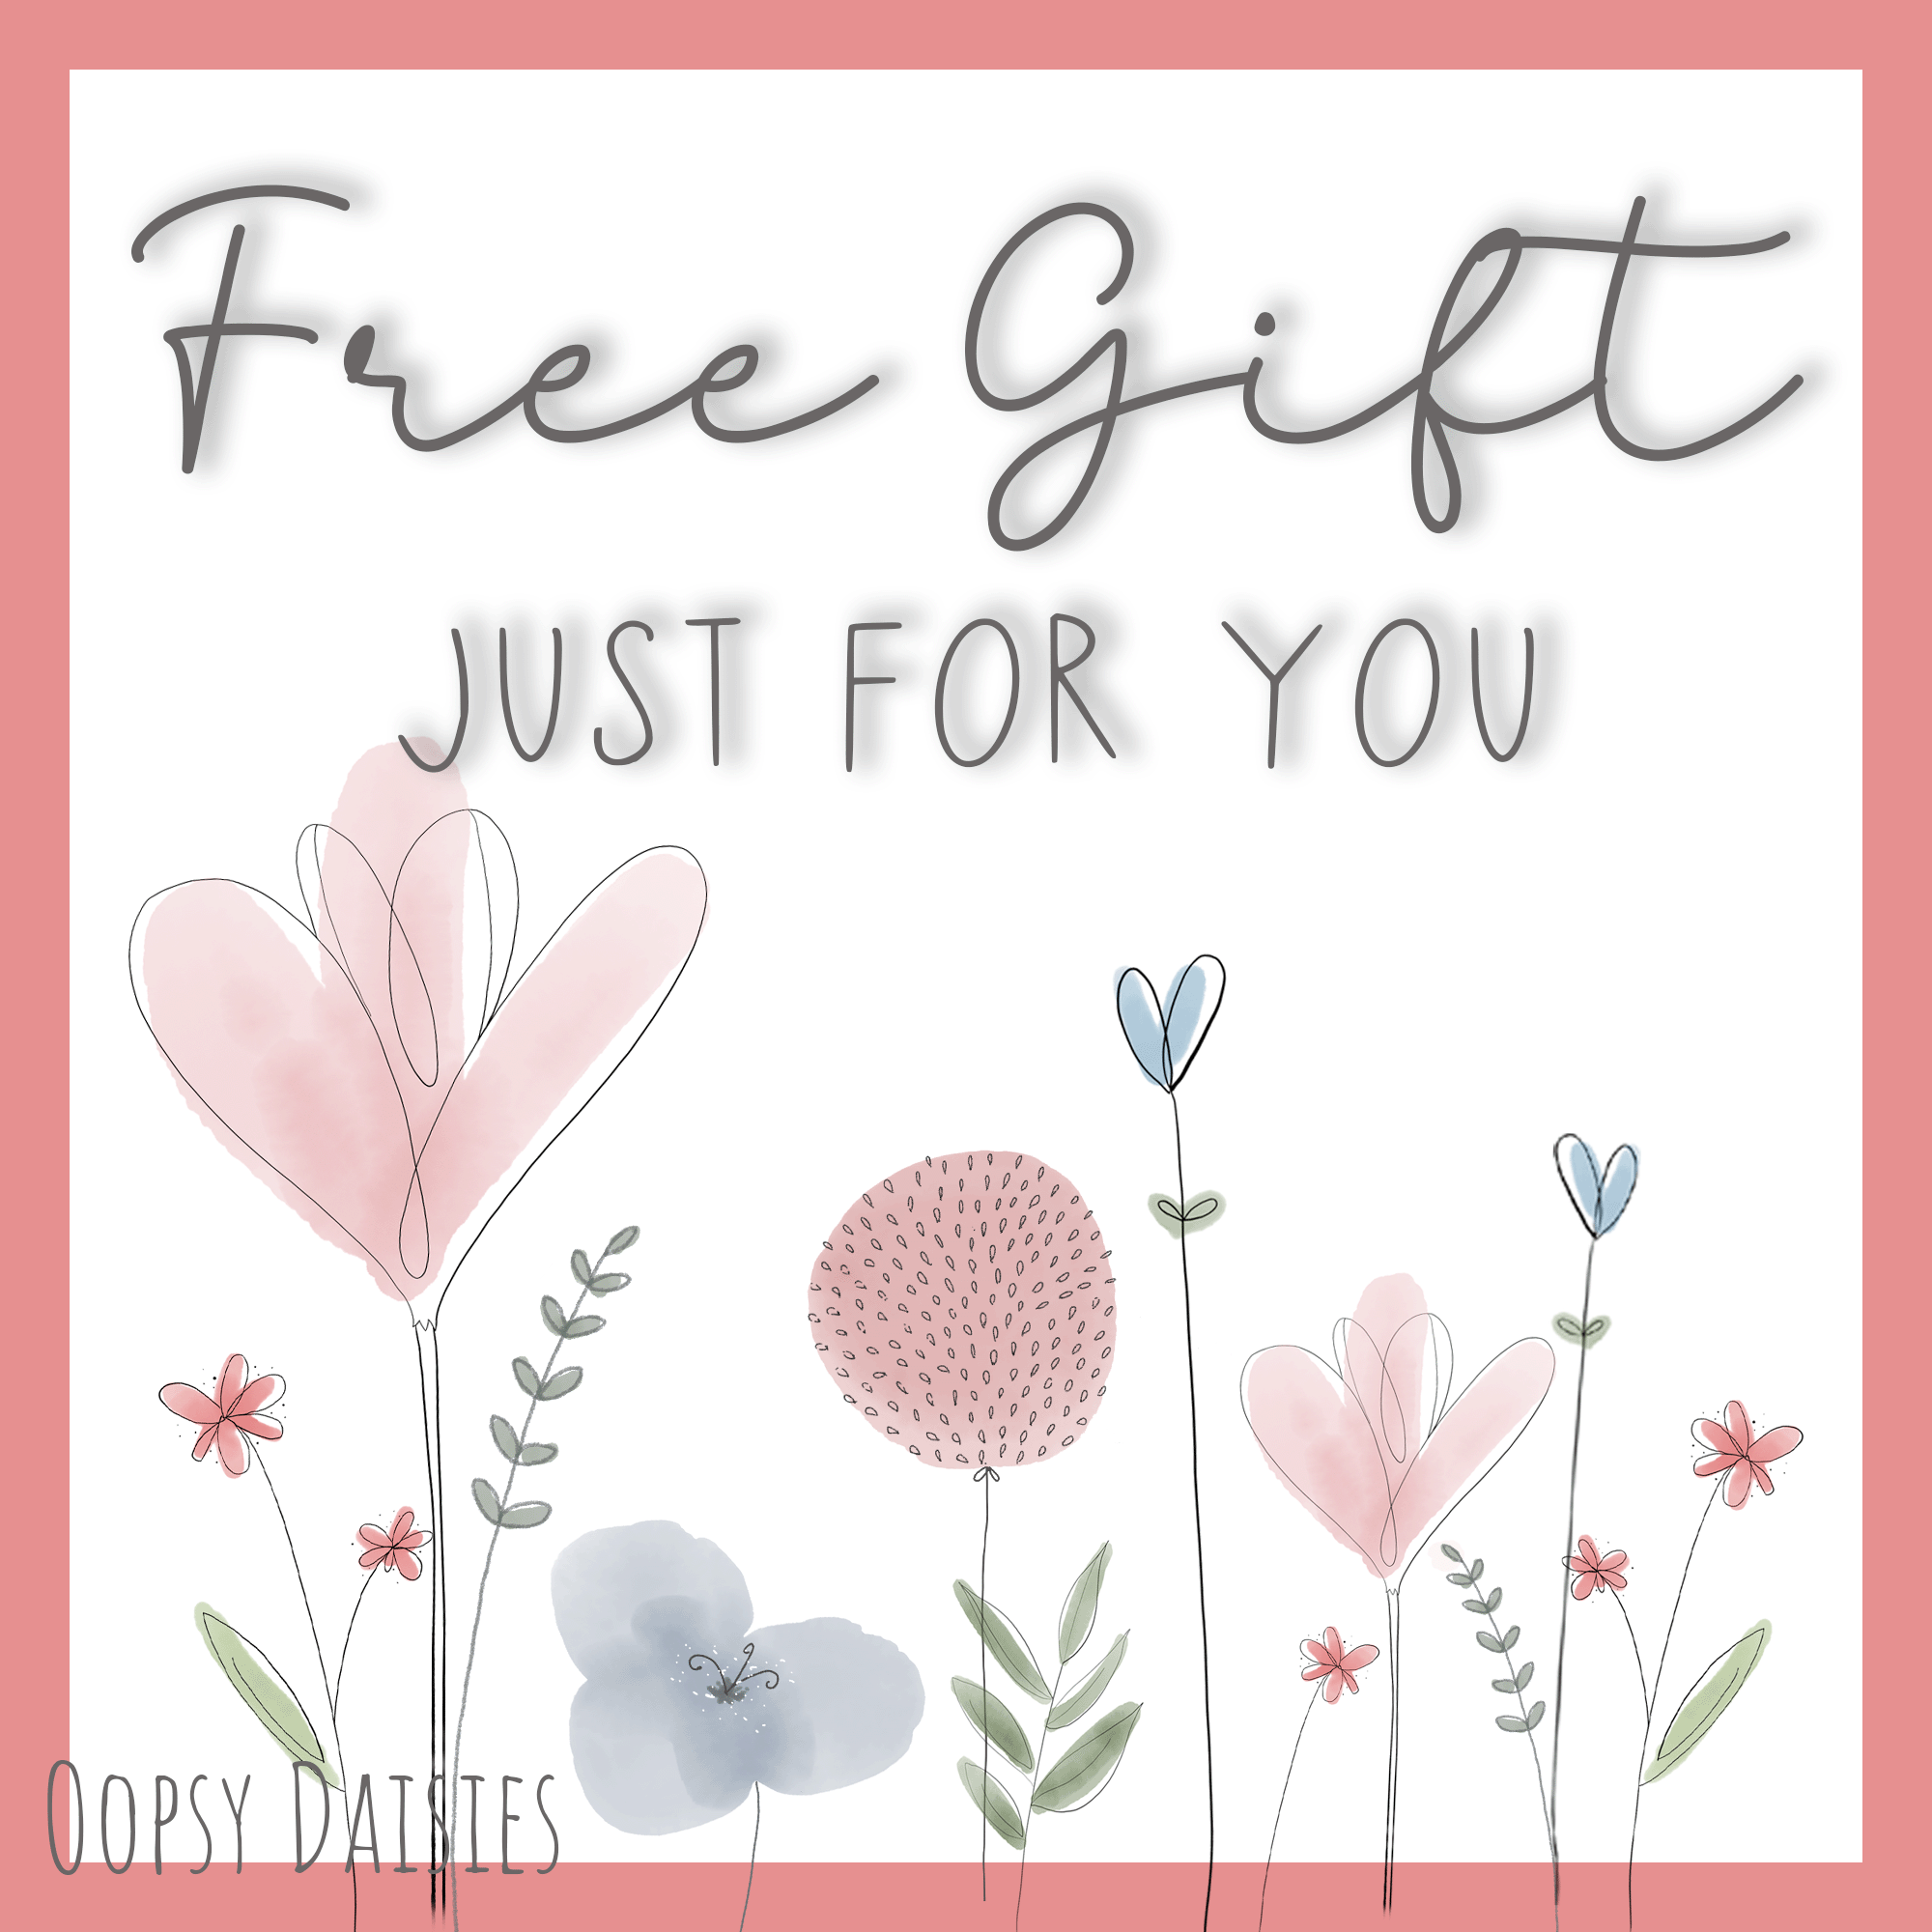 It's FREE GIFT time!